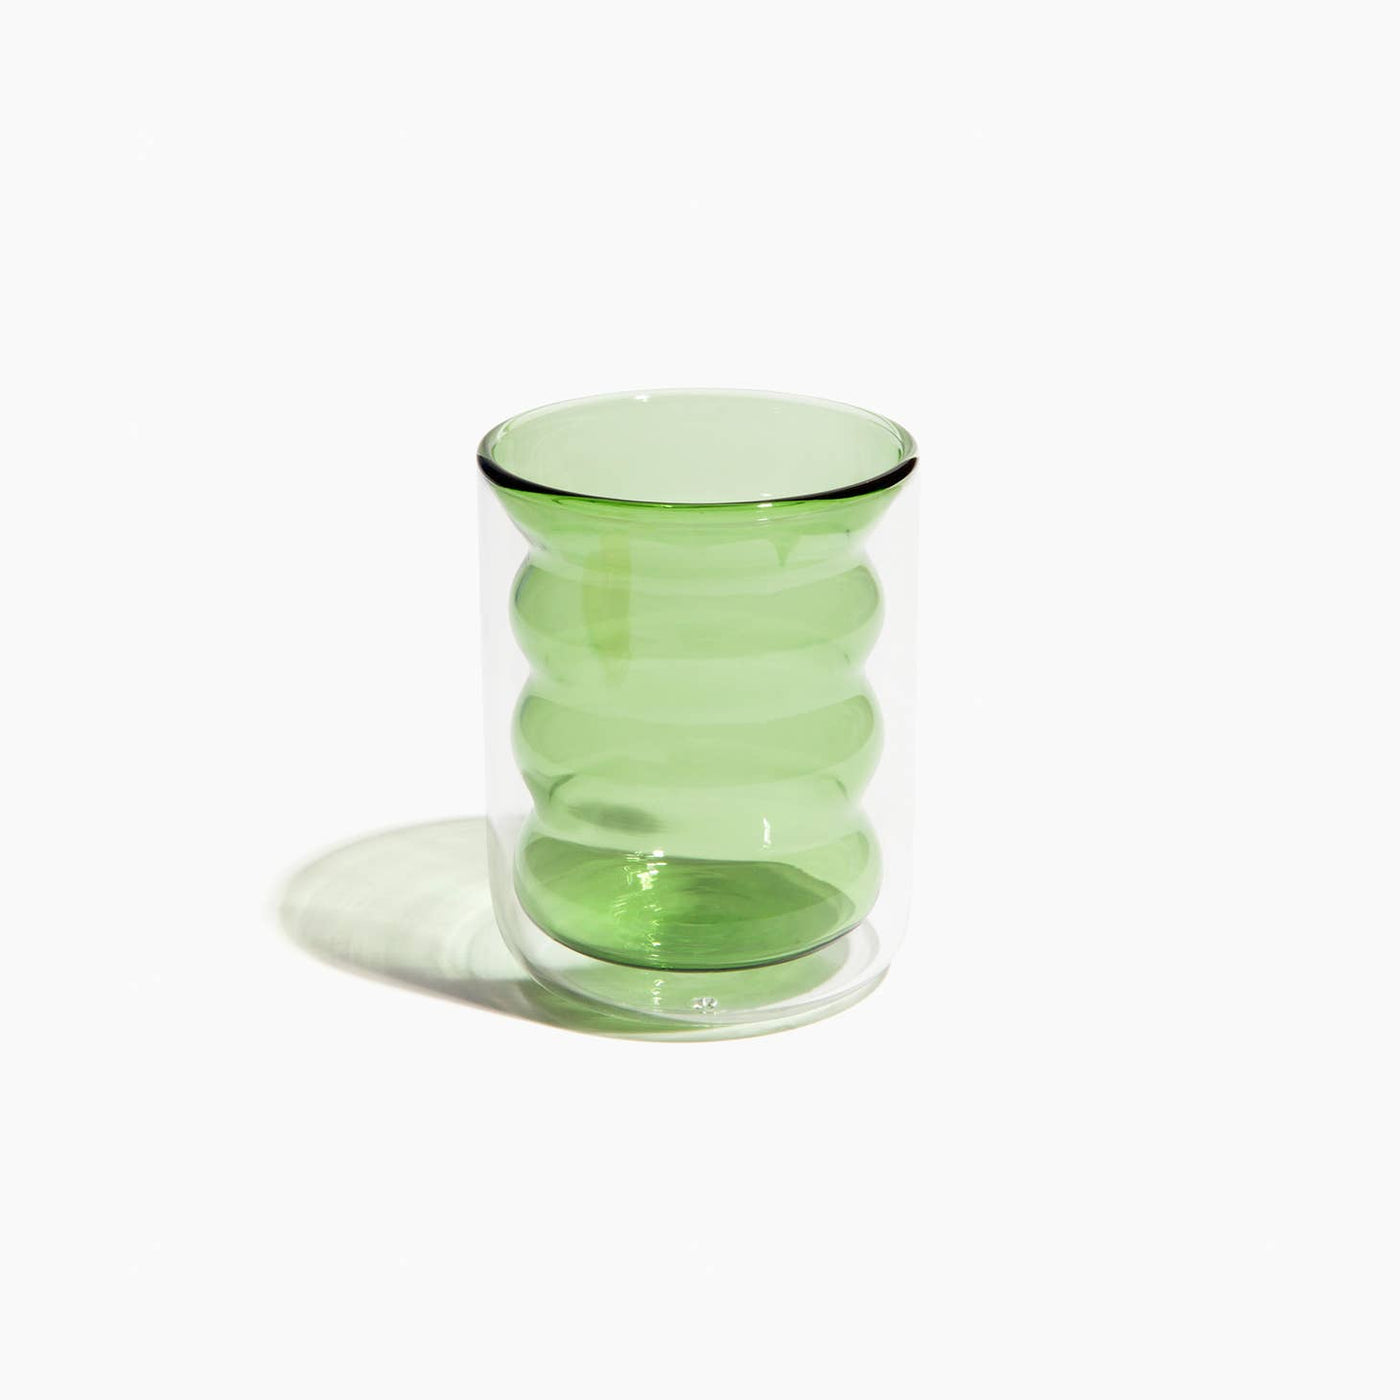 Poketo glass double-walled cup in green